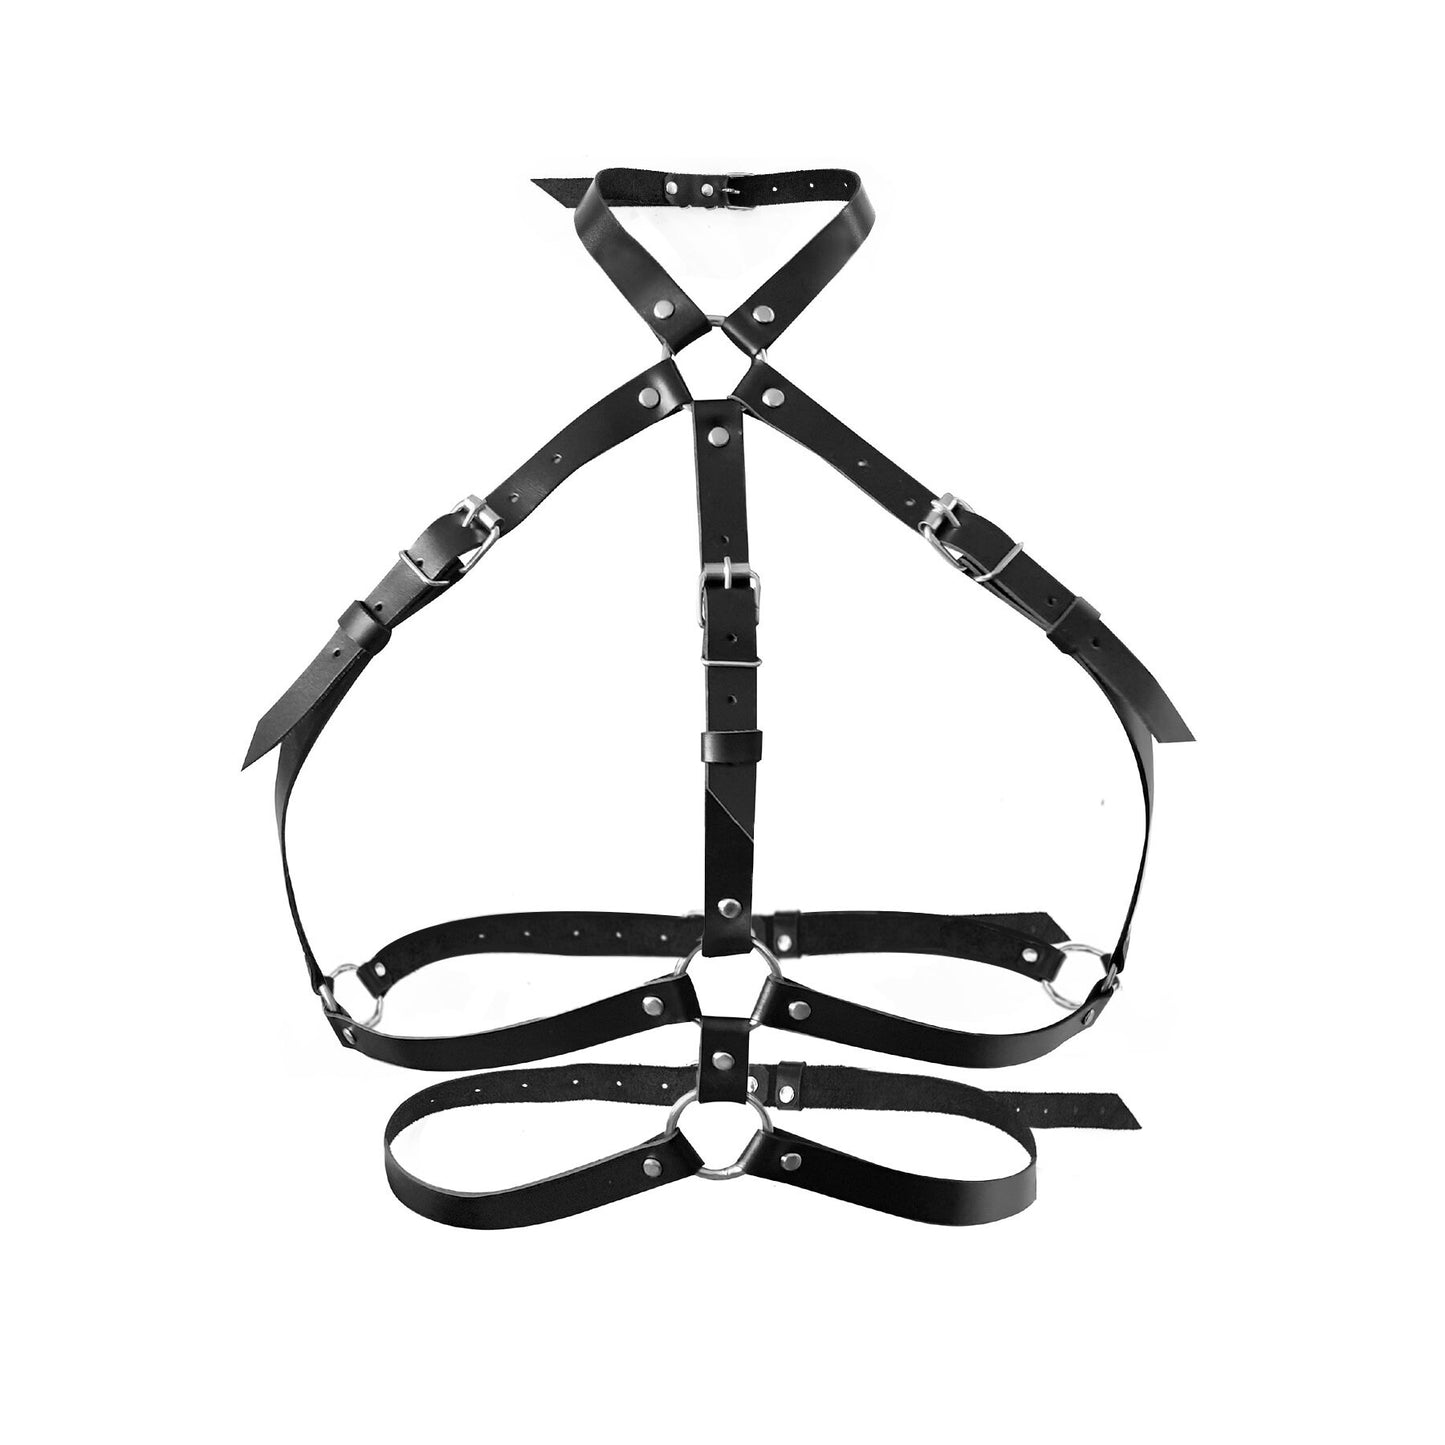 Leather BDSM harness